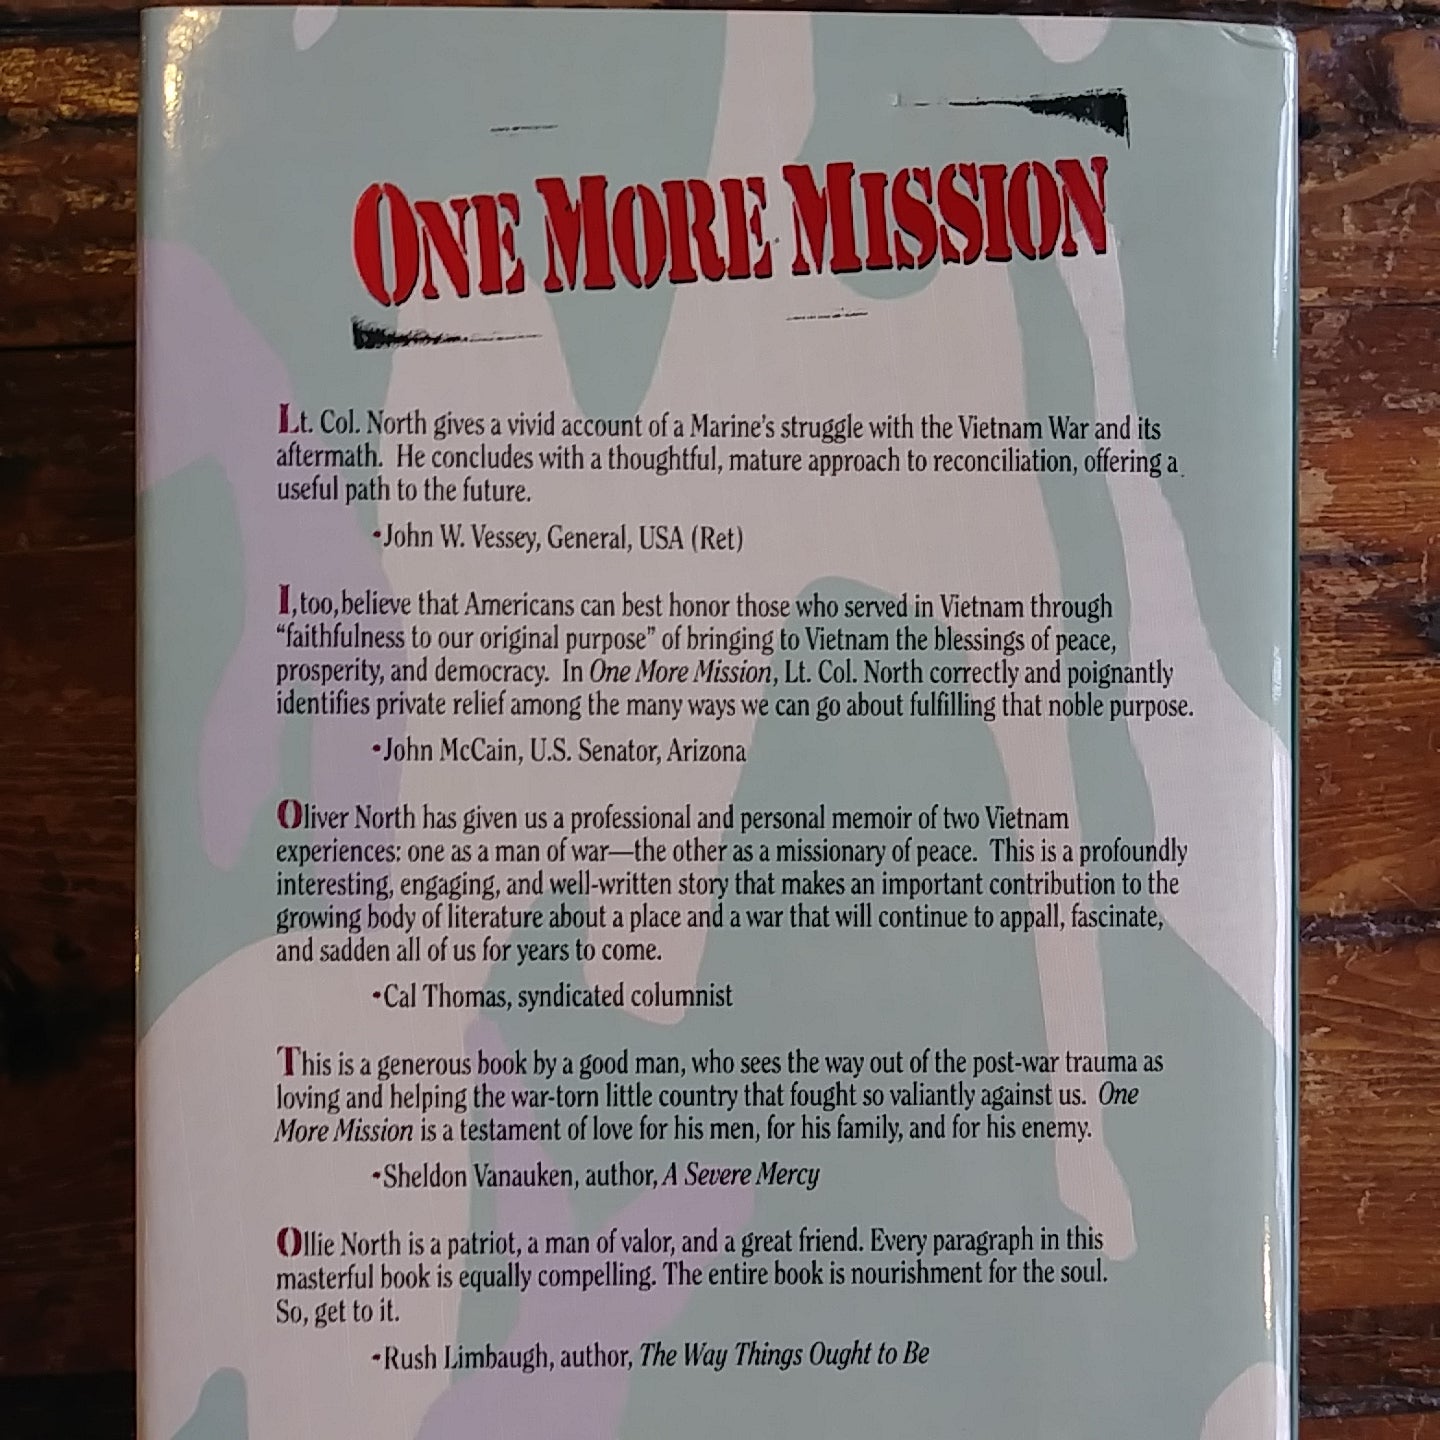 Book, "One More Mission - Oliver North Returns to Vietnam"